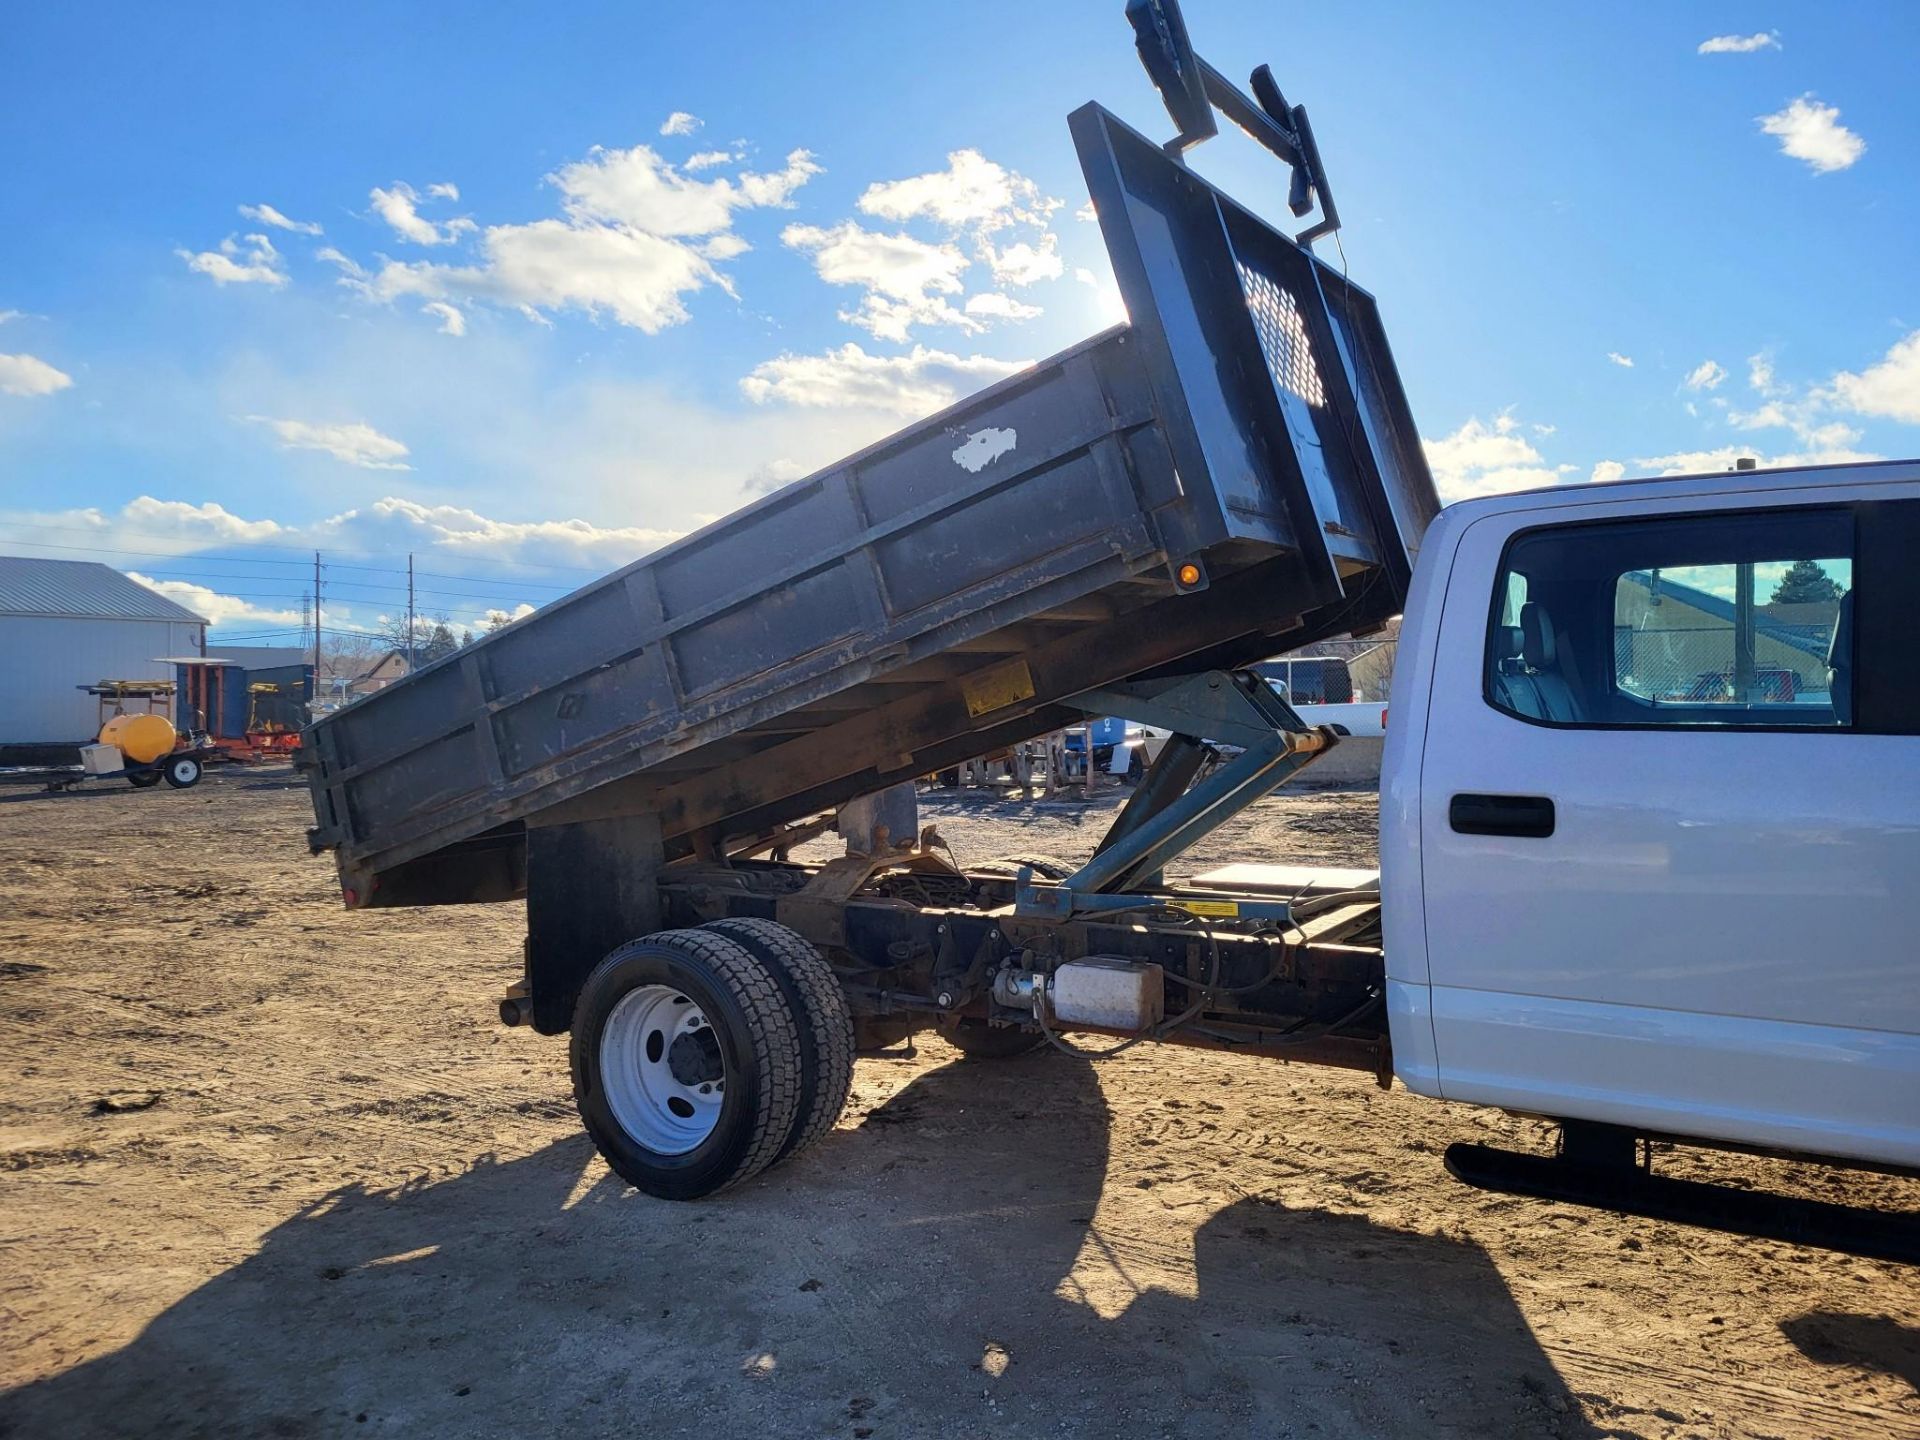 2019 FORD F550 CREW CAB DIESEL DUALLY DUMP TRUCK 31,872 MILES - Image 32 of 34